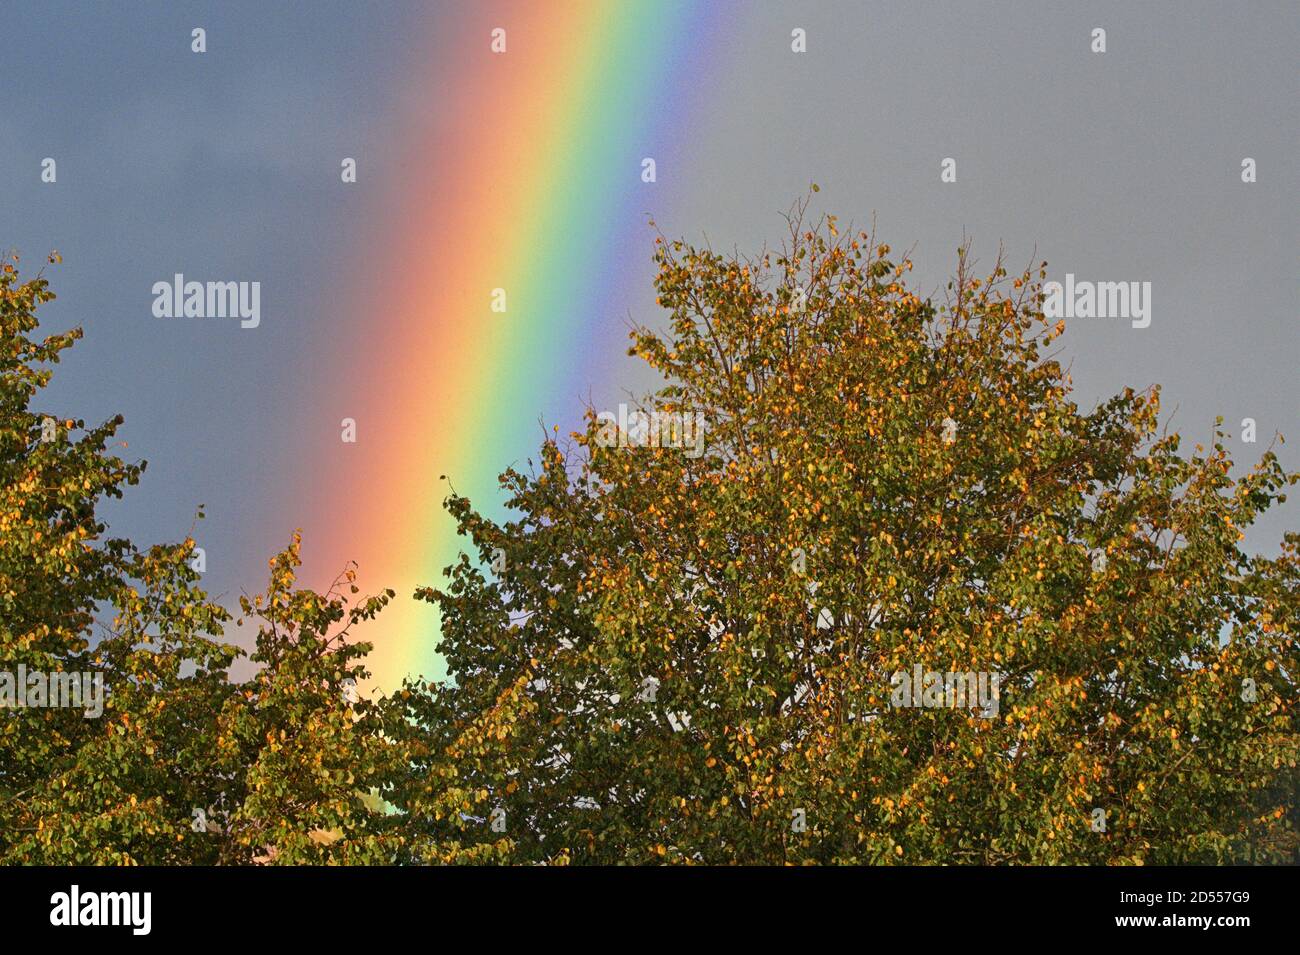 October 7th, 2020, a powerful rainbow in the dark cloudy sky over Schleswig. The arc-shaped, colored light band is created when the sun shines on a wall of rain and the light is broken into its spectral colors. | usage worldwide Stock Photo